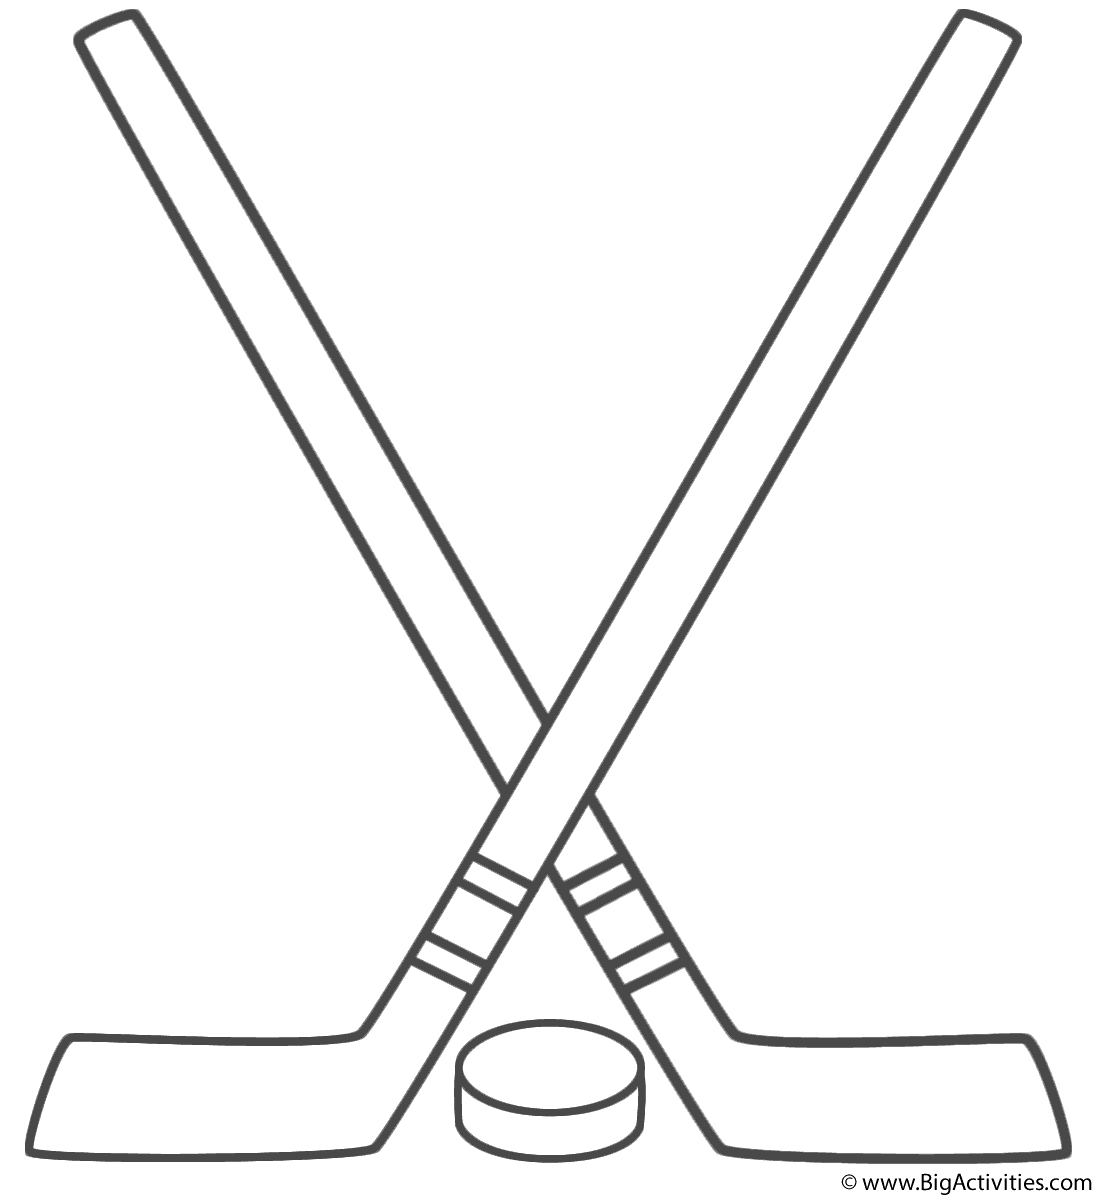 Hockey Sticks with Puck - Coloring Page (Sports)